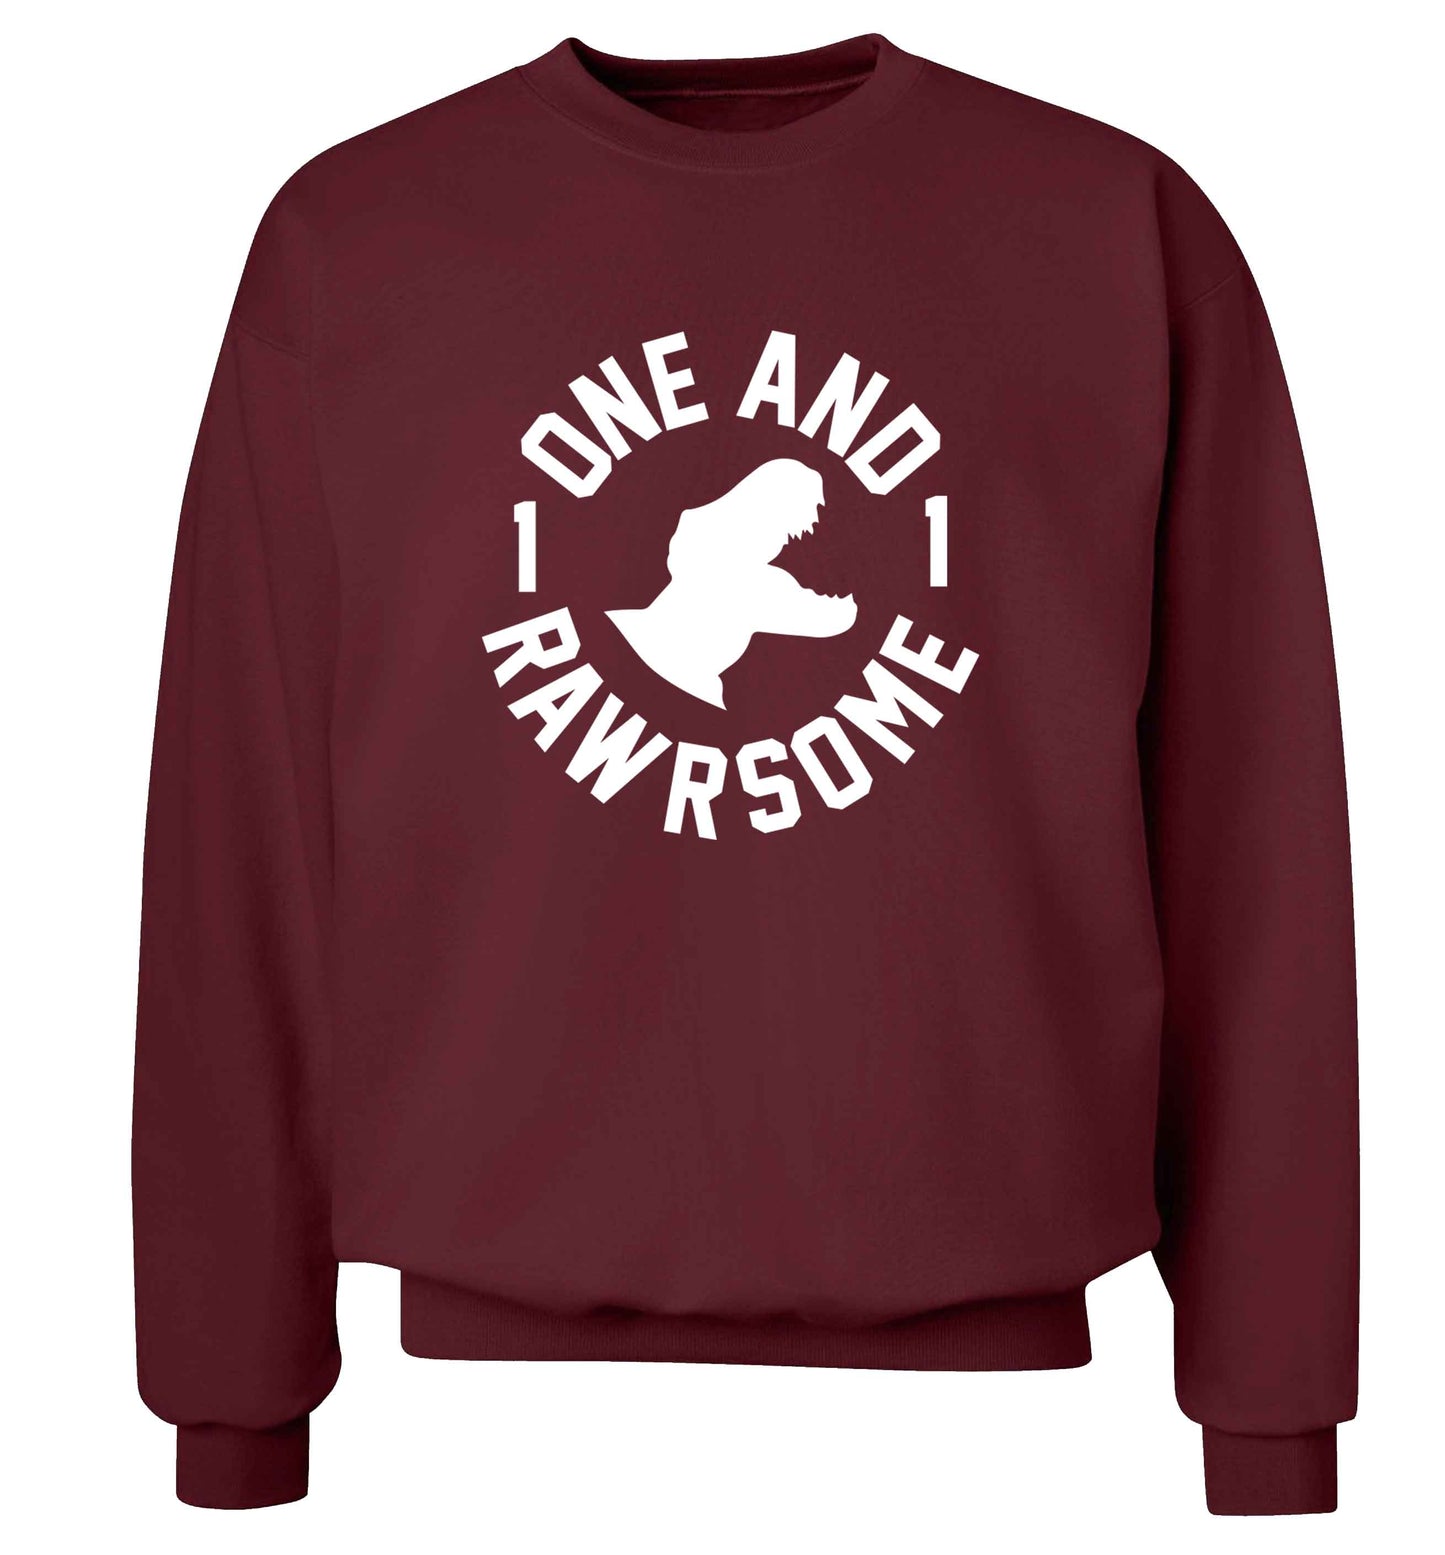 One and Rawrsome adult's unisex maroon sweater 2XL